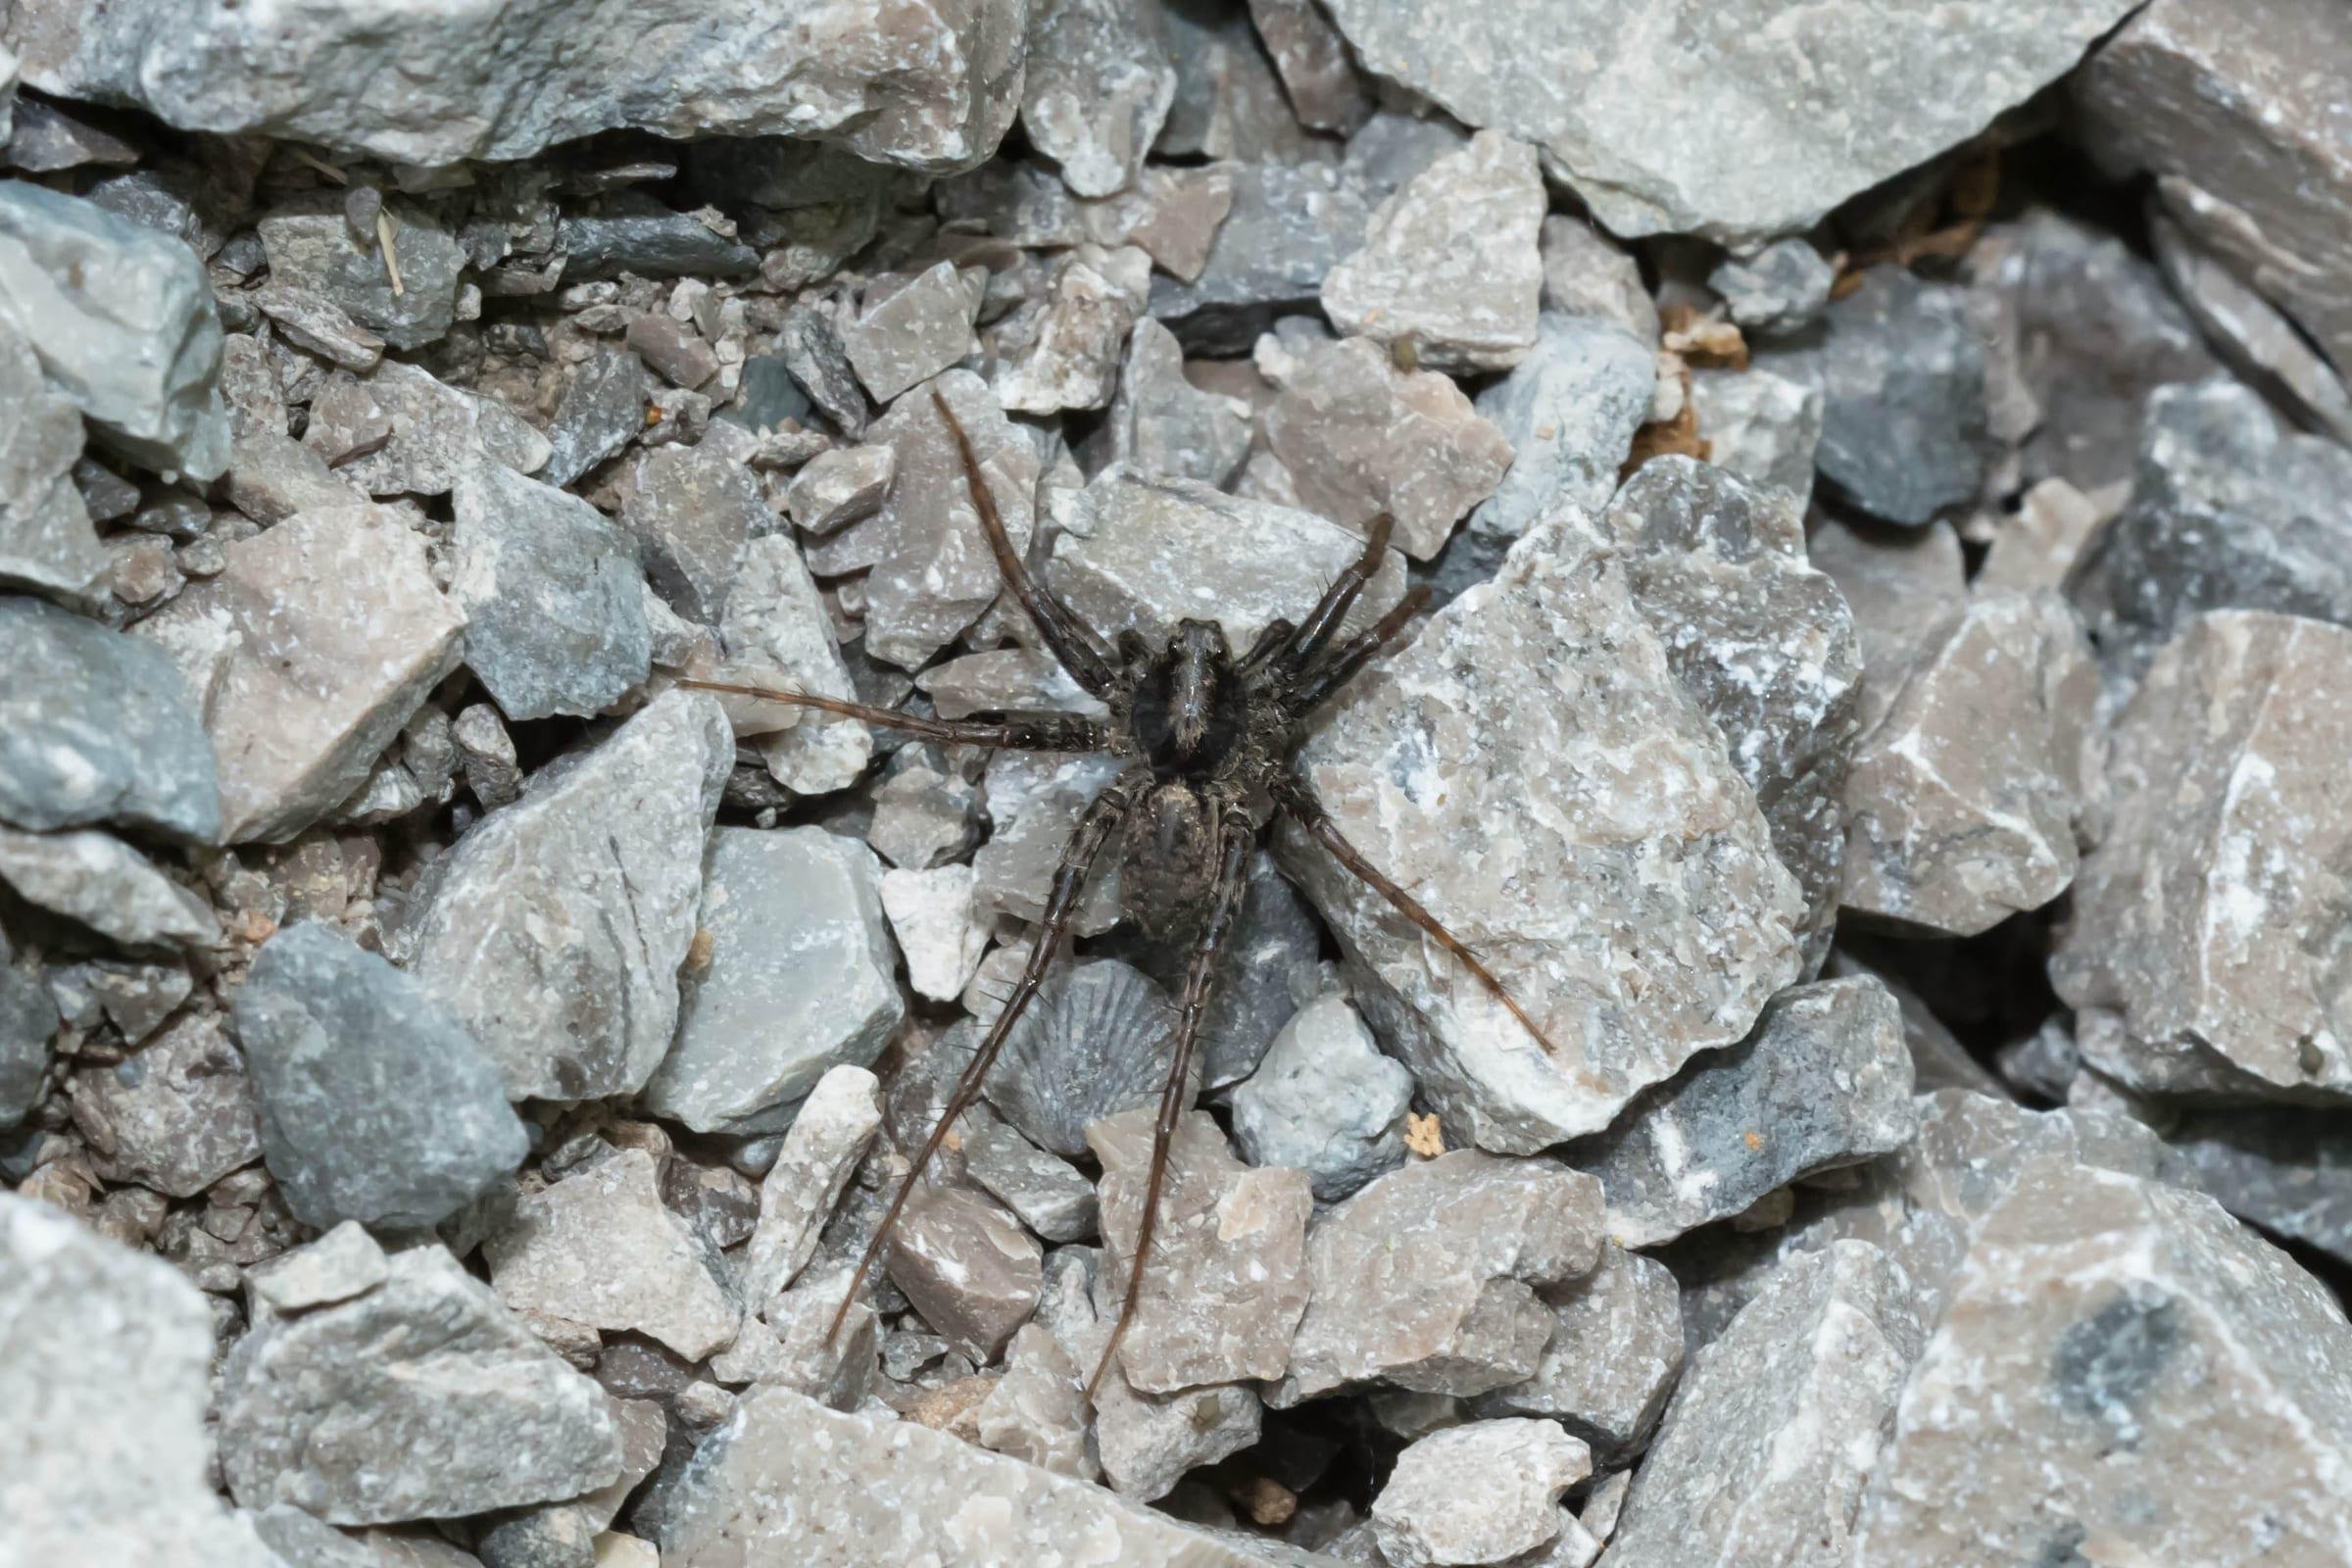 A Thin-legged Wolf Spider is resting on a gravel path_Photo by Paul Reeves Photography